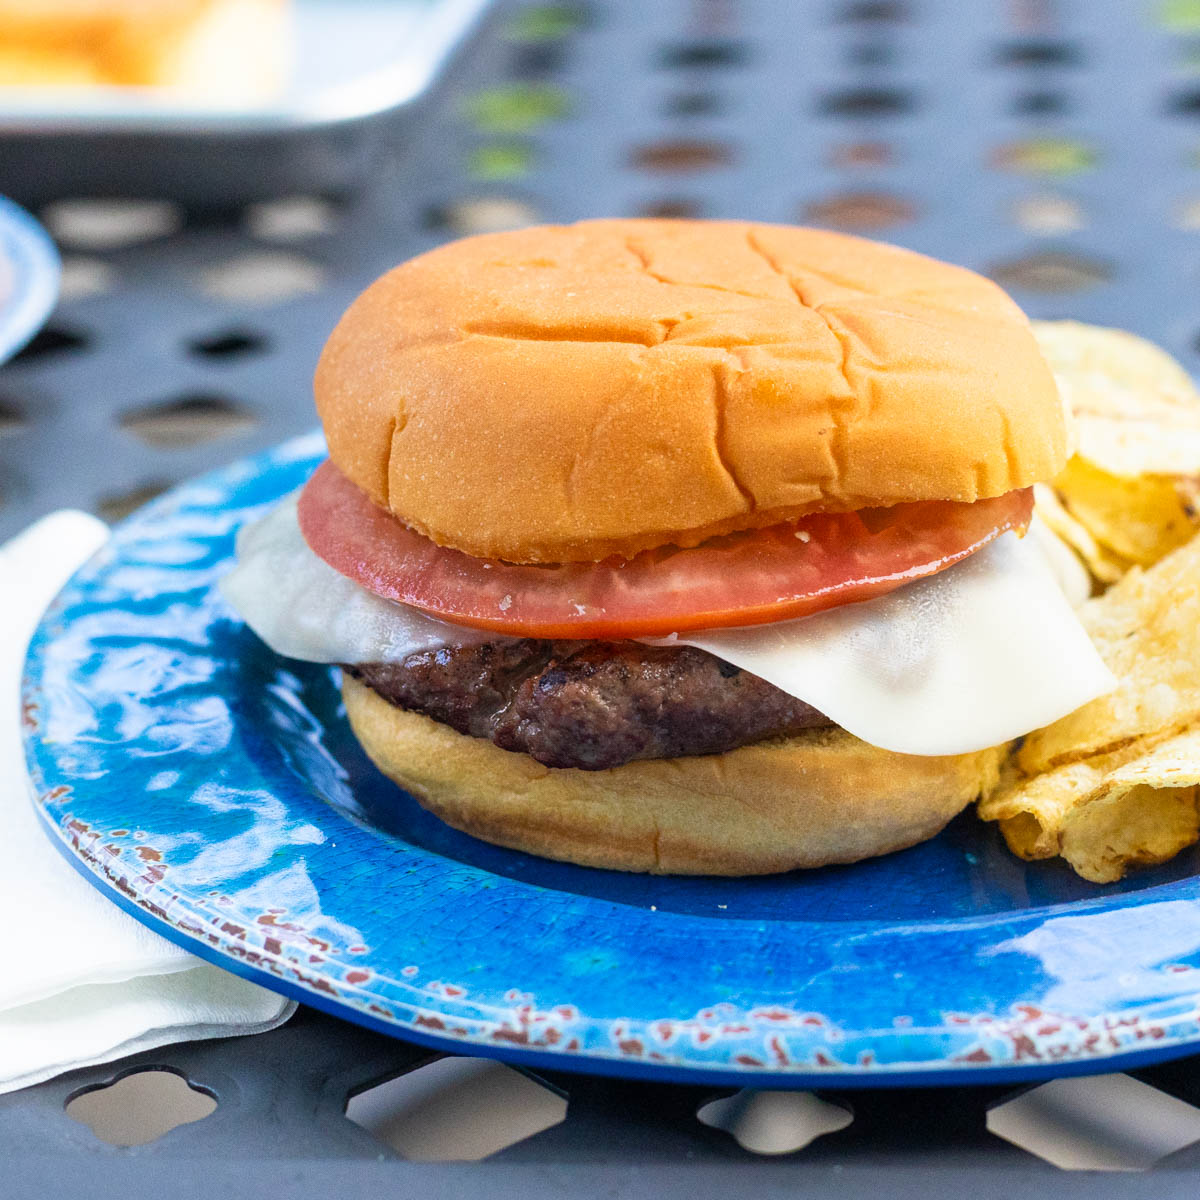 A simple hamburger with provolone cheese and a sliced tomato on a blue plate.